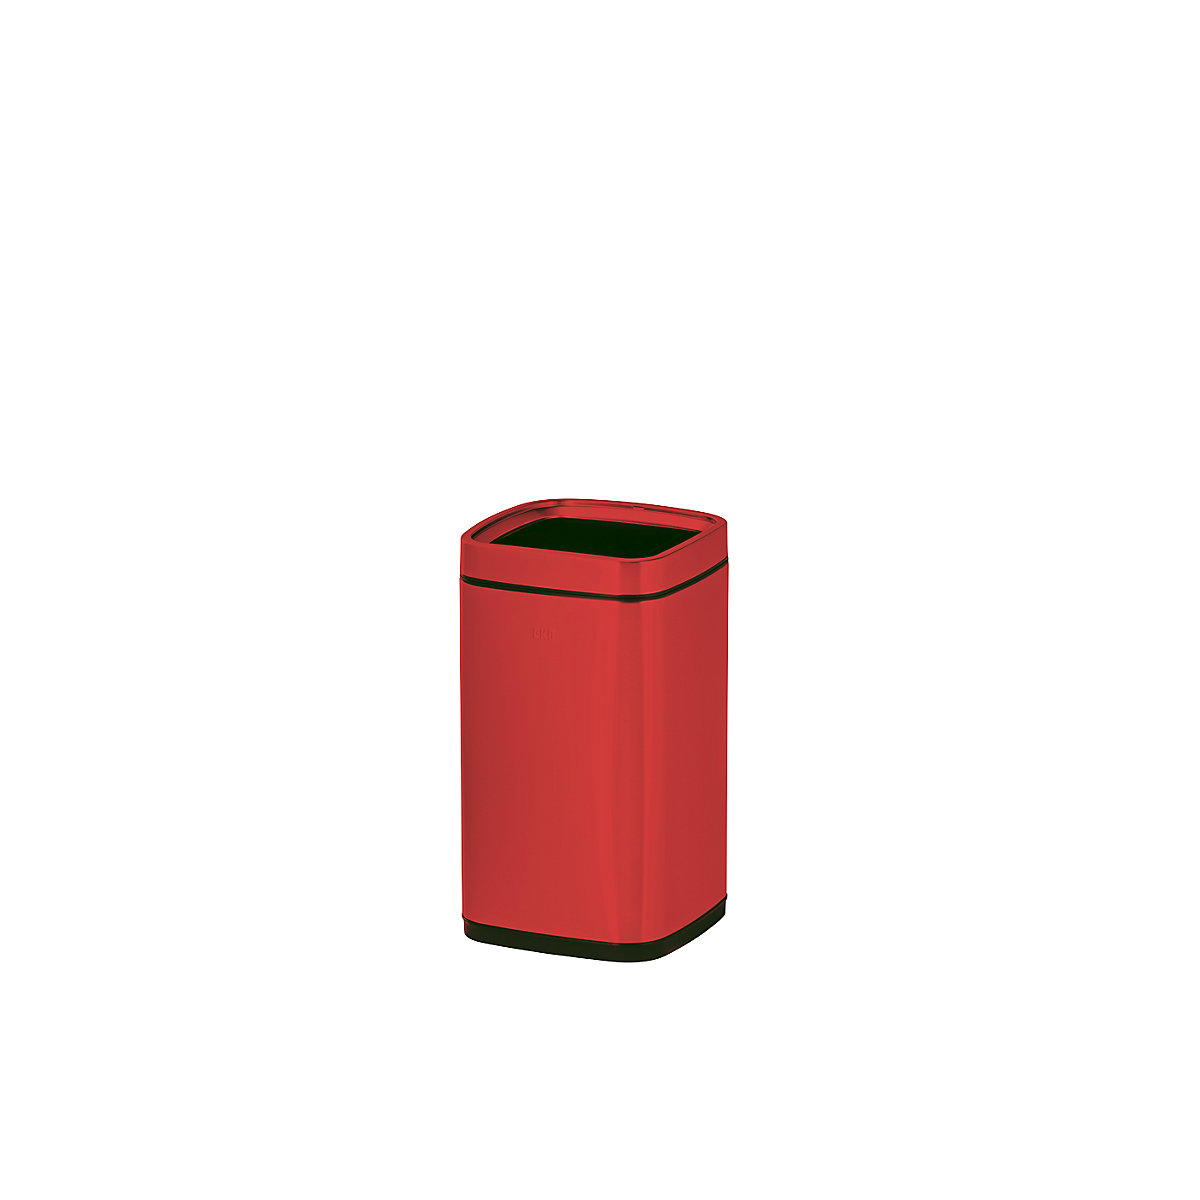 Waste paper bin with inner container - EKO